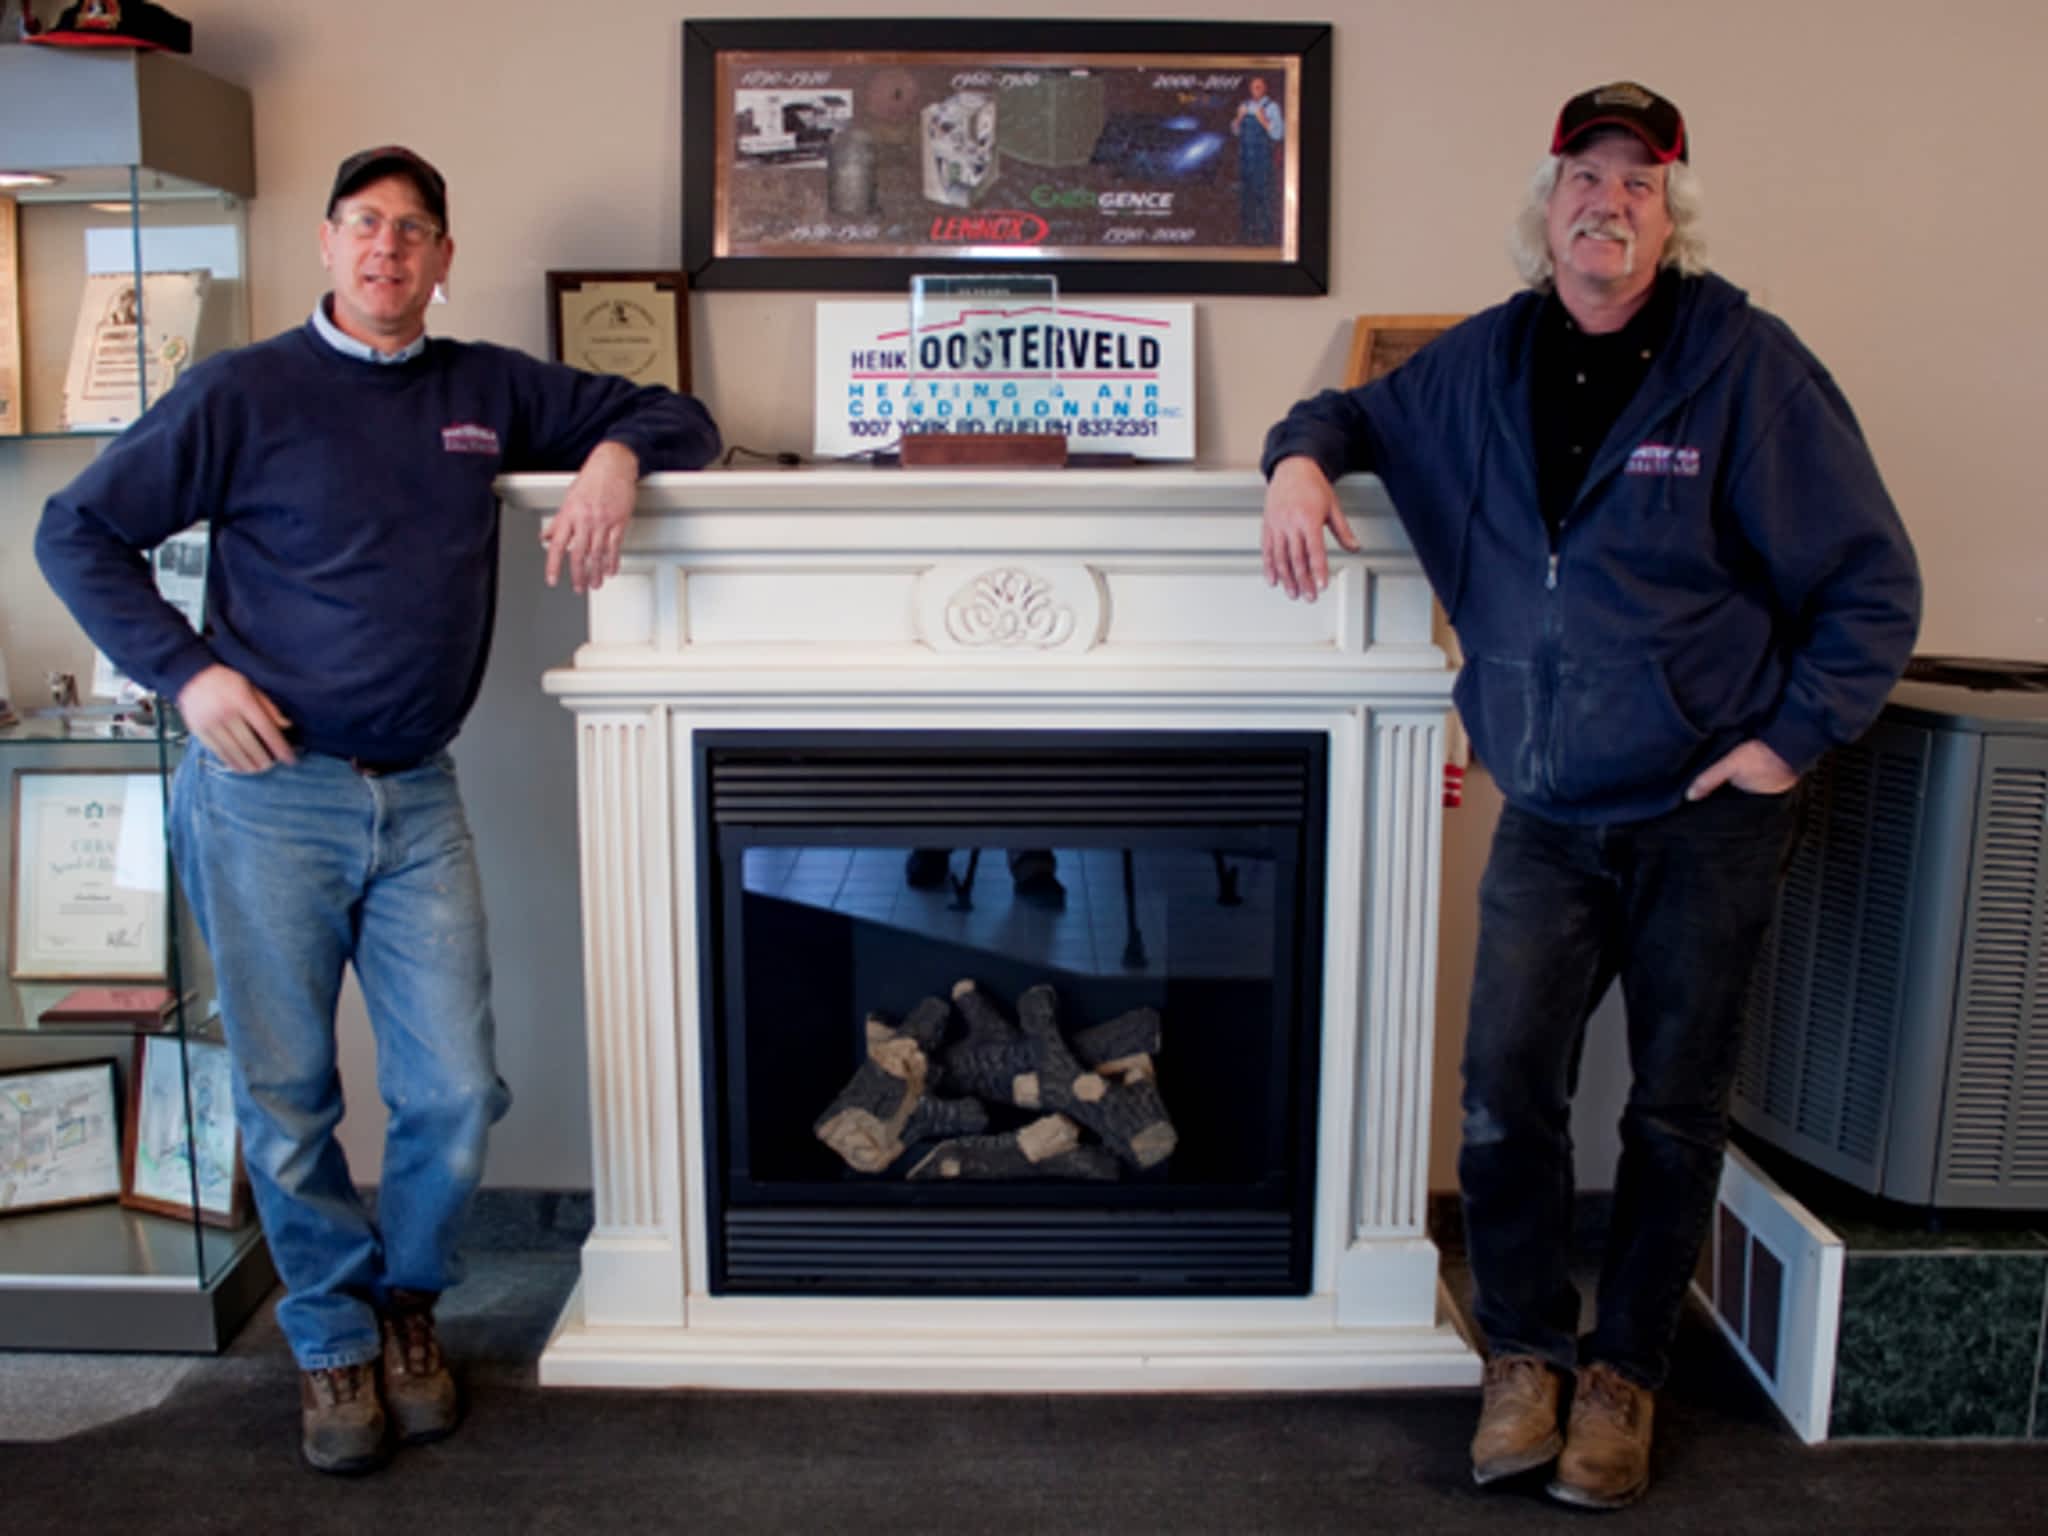 photo Oosterveld Heating & Air Conditioning Inc.